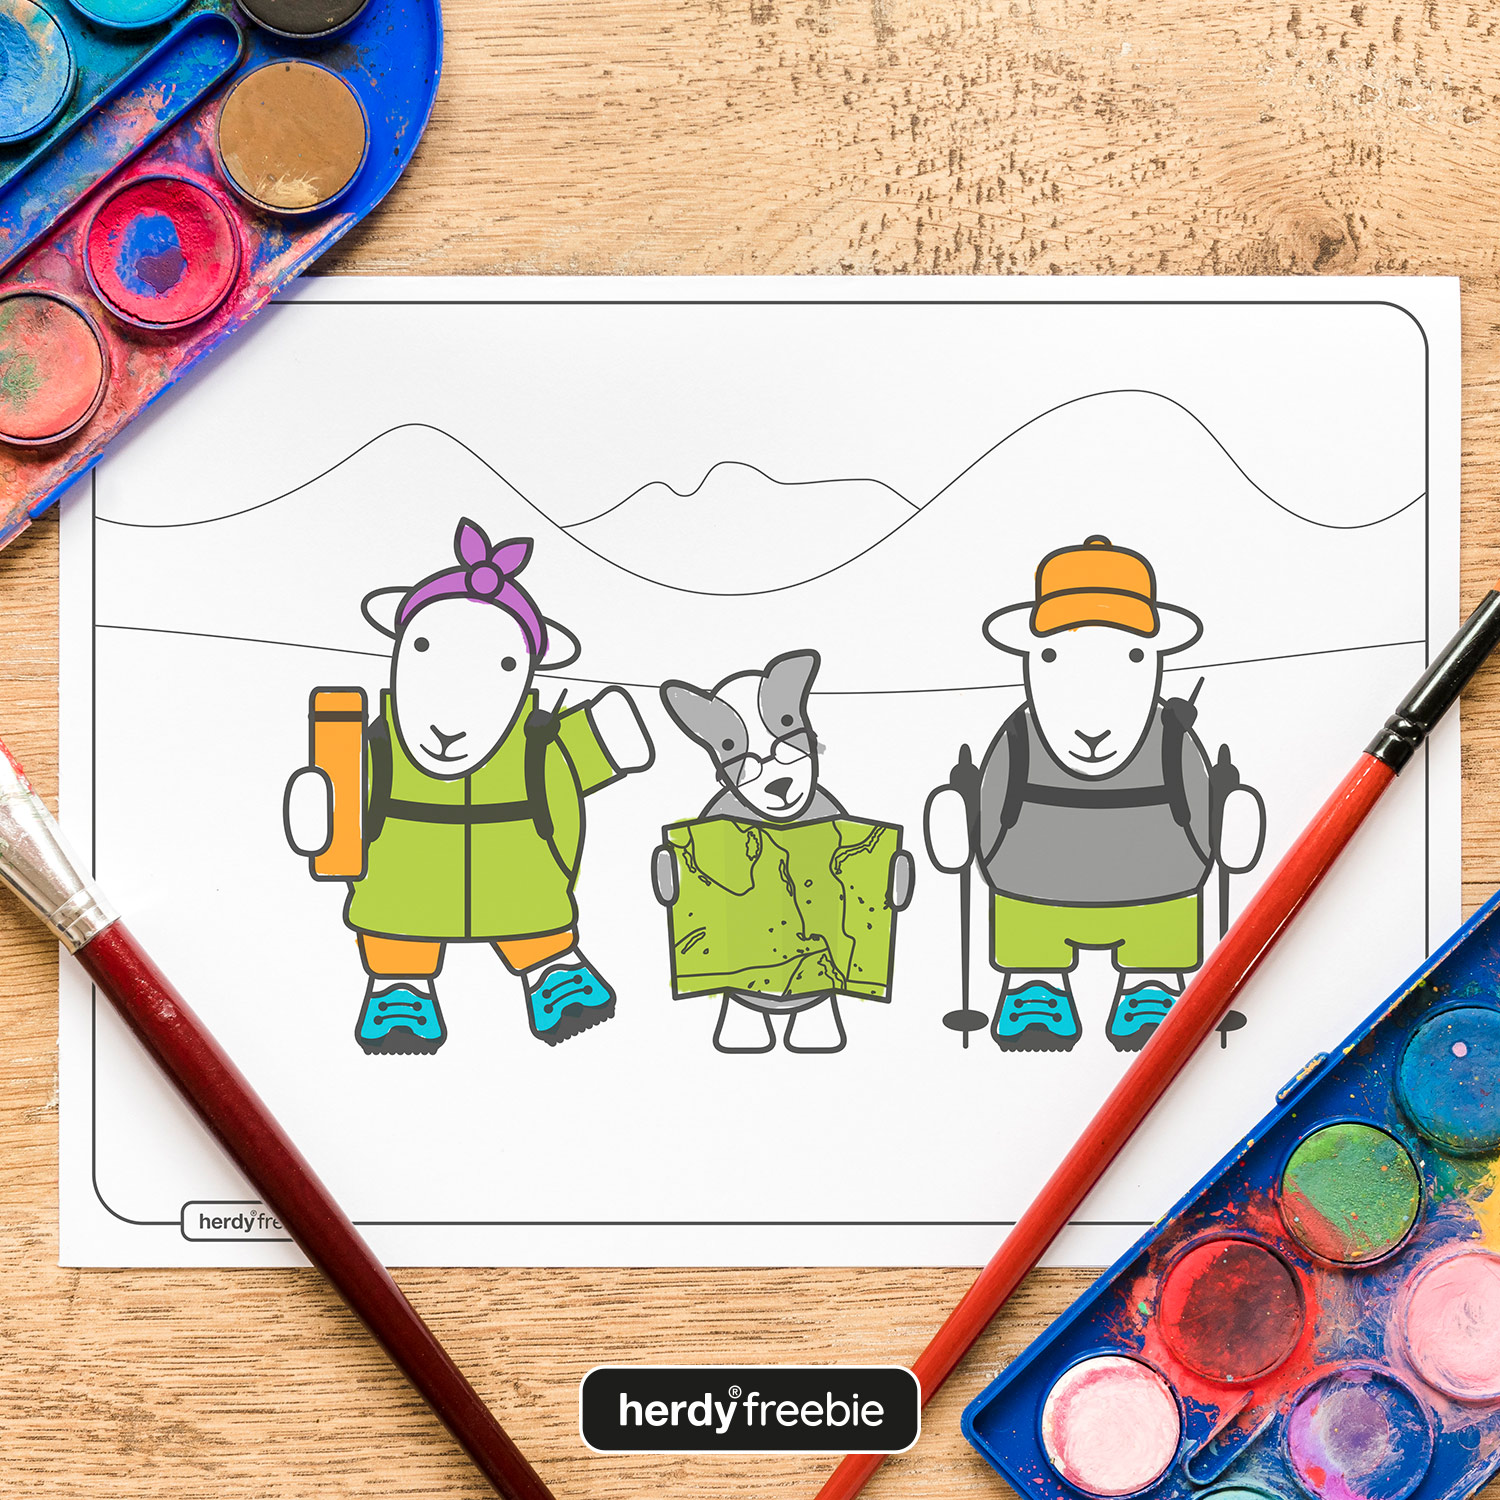 Herdy free coloring in download: image shows Herdy and Sheppy hiking in the Lake District